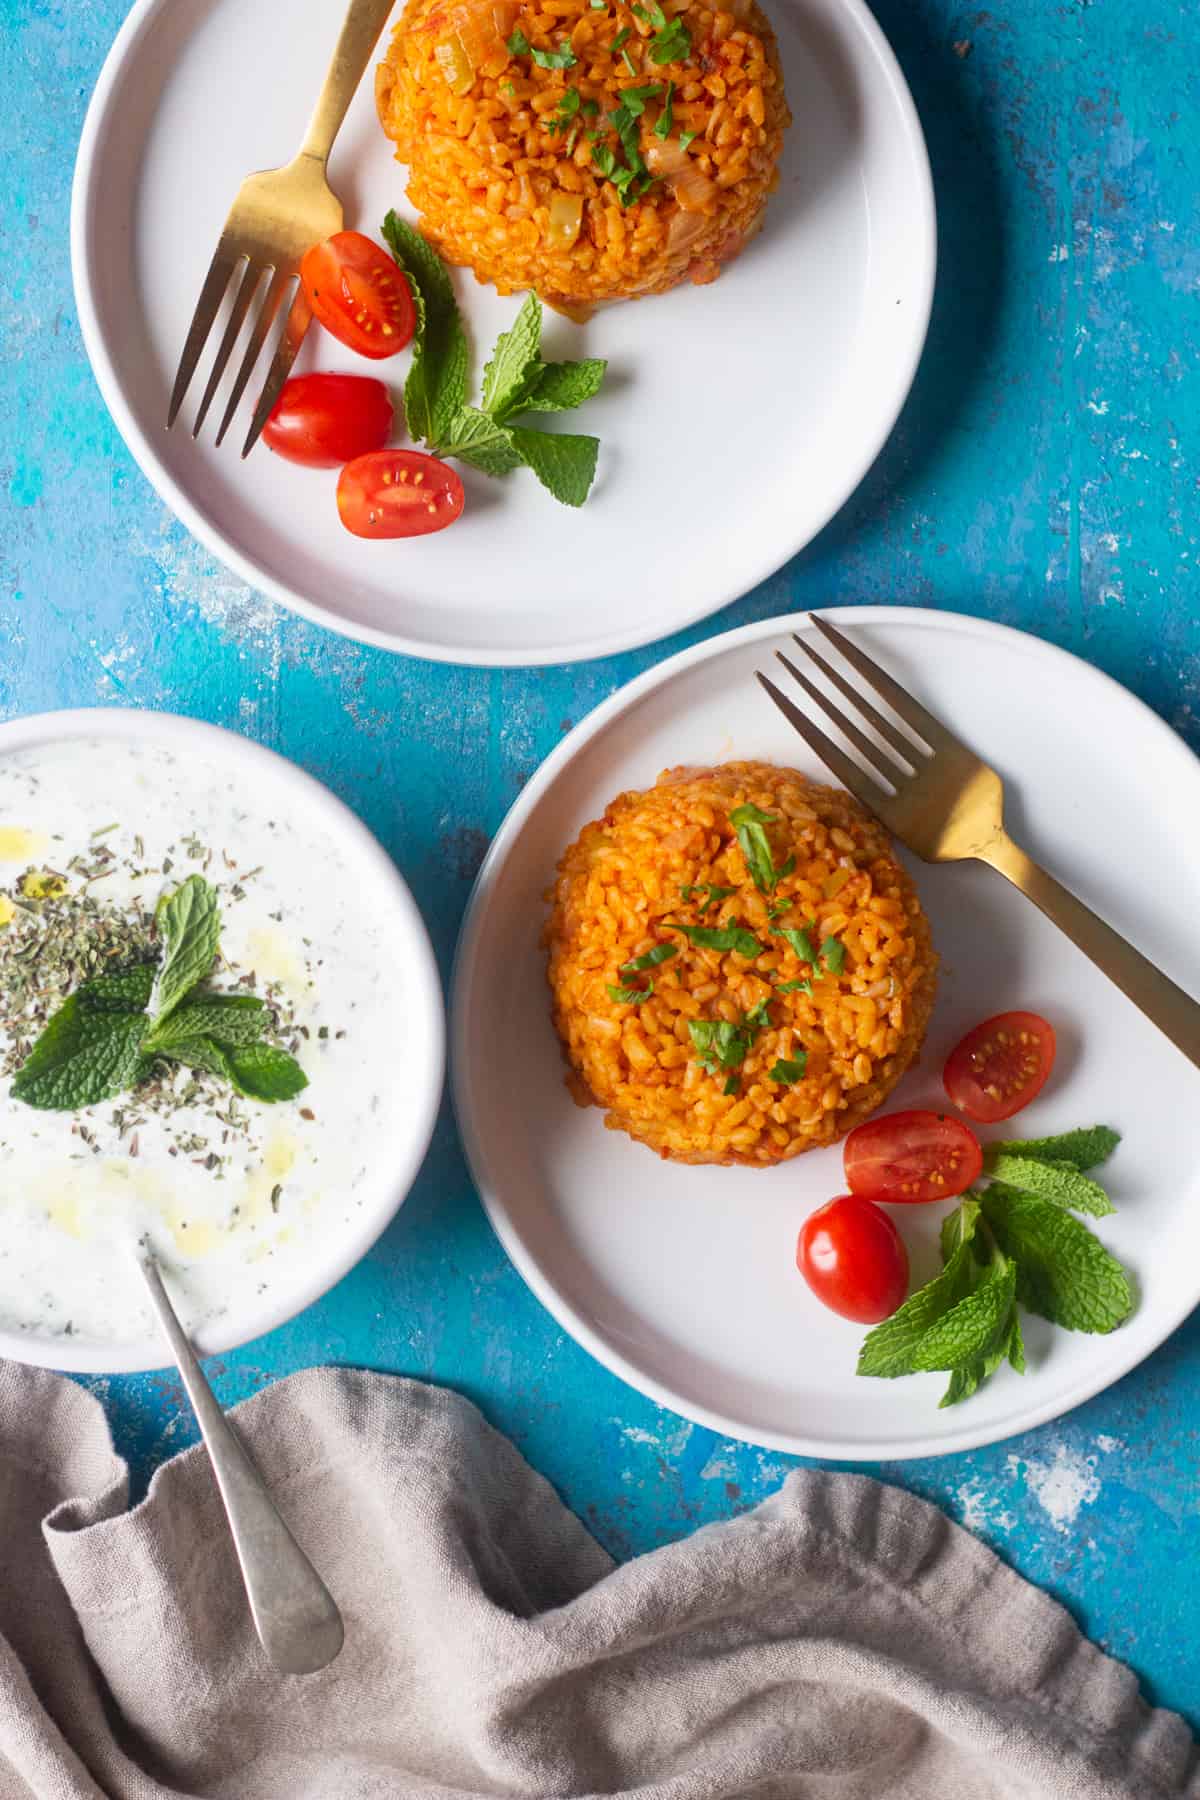 Turkish style bulgur pilaf is a classic hearty and healthy side dish dish that is very easy to make. It's a great alternative to rice and can be served with many dishes. 